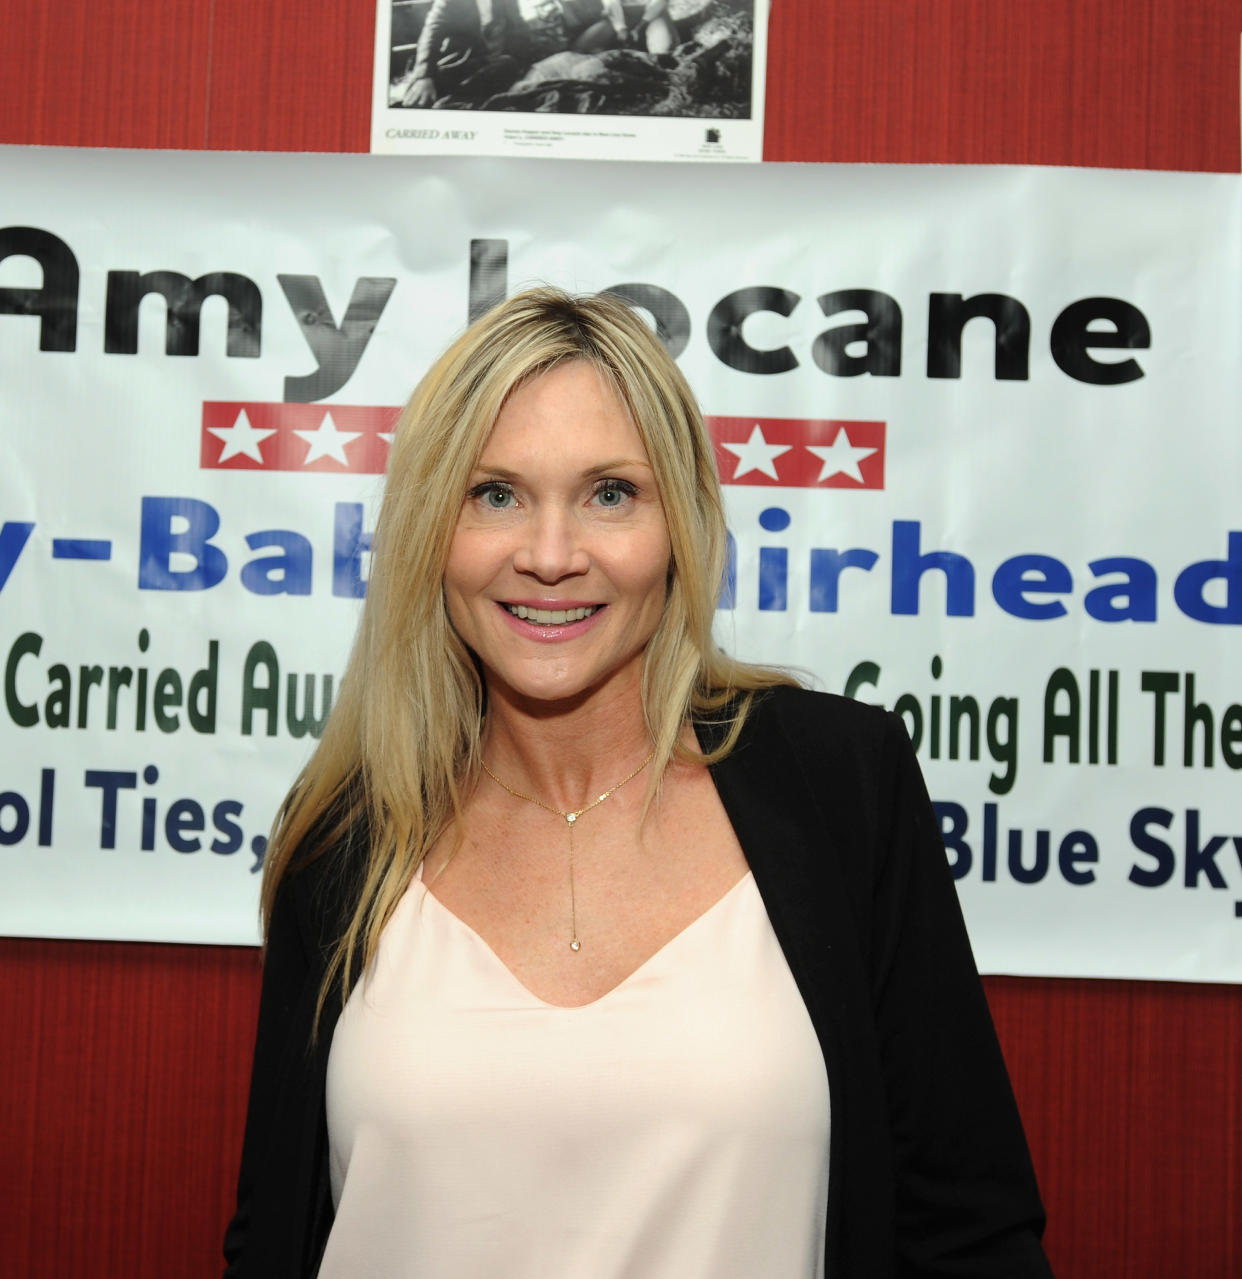 Melrose Place actress Amy Locane has gone to prison again for fatal car crash in 2010.